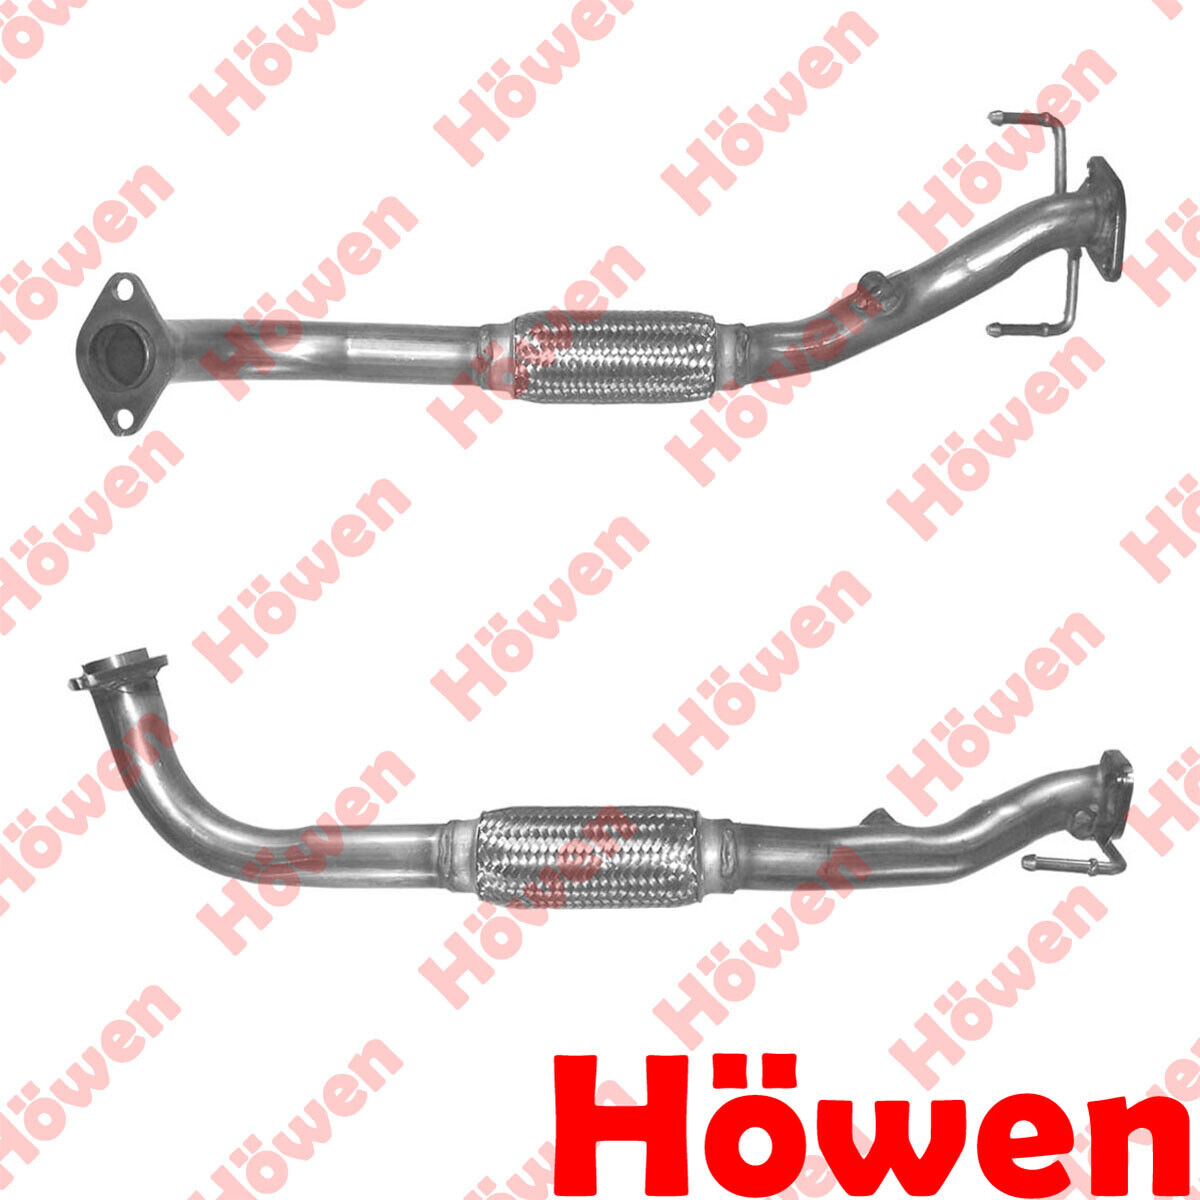 Fits Proton Satria 1996-2000 1.6 + Other Models Exhaust Pipe Euro 2 Front Howen